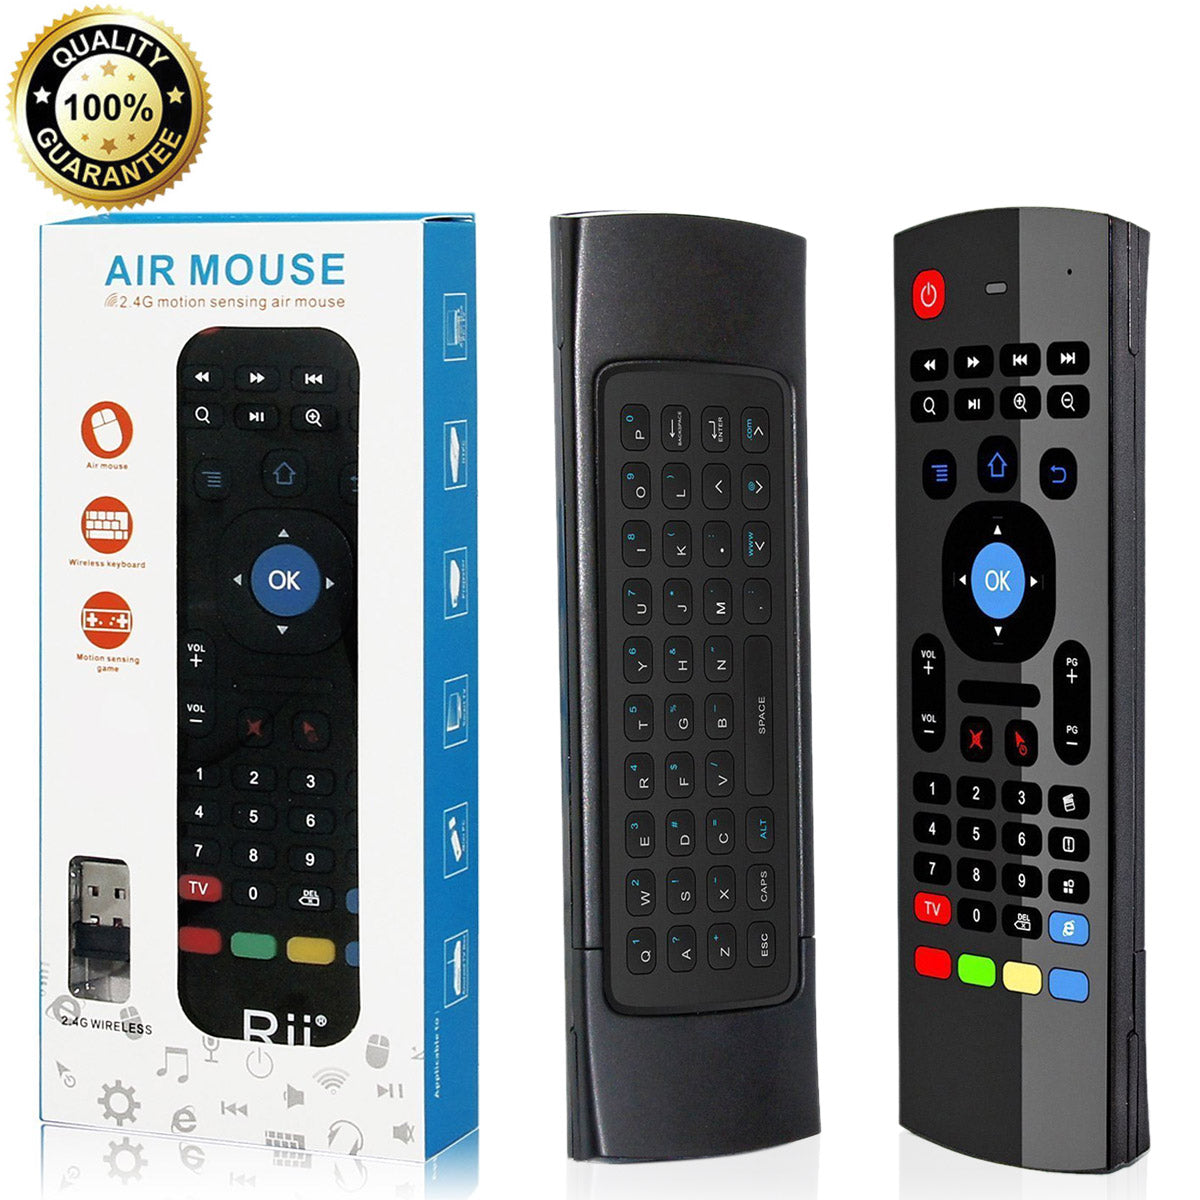 2.4G Wireless Keyboard Air Mouse IR Remote Learning for Android